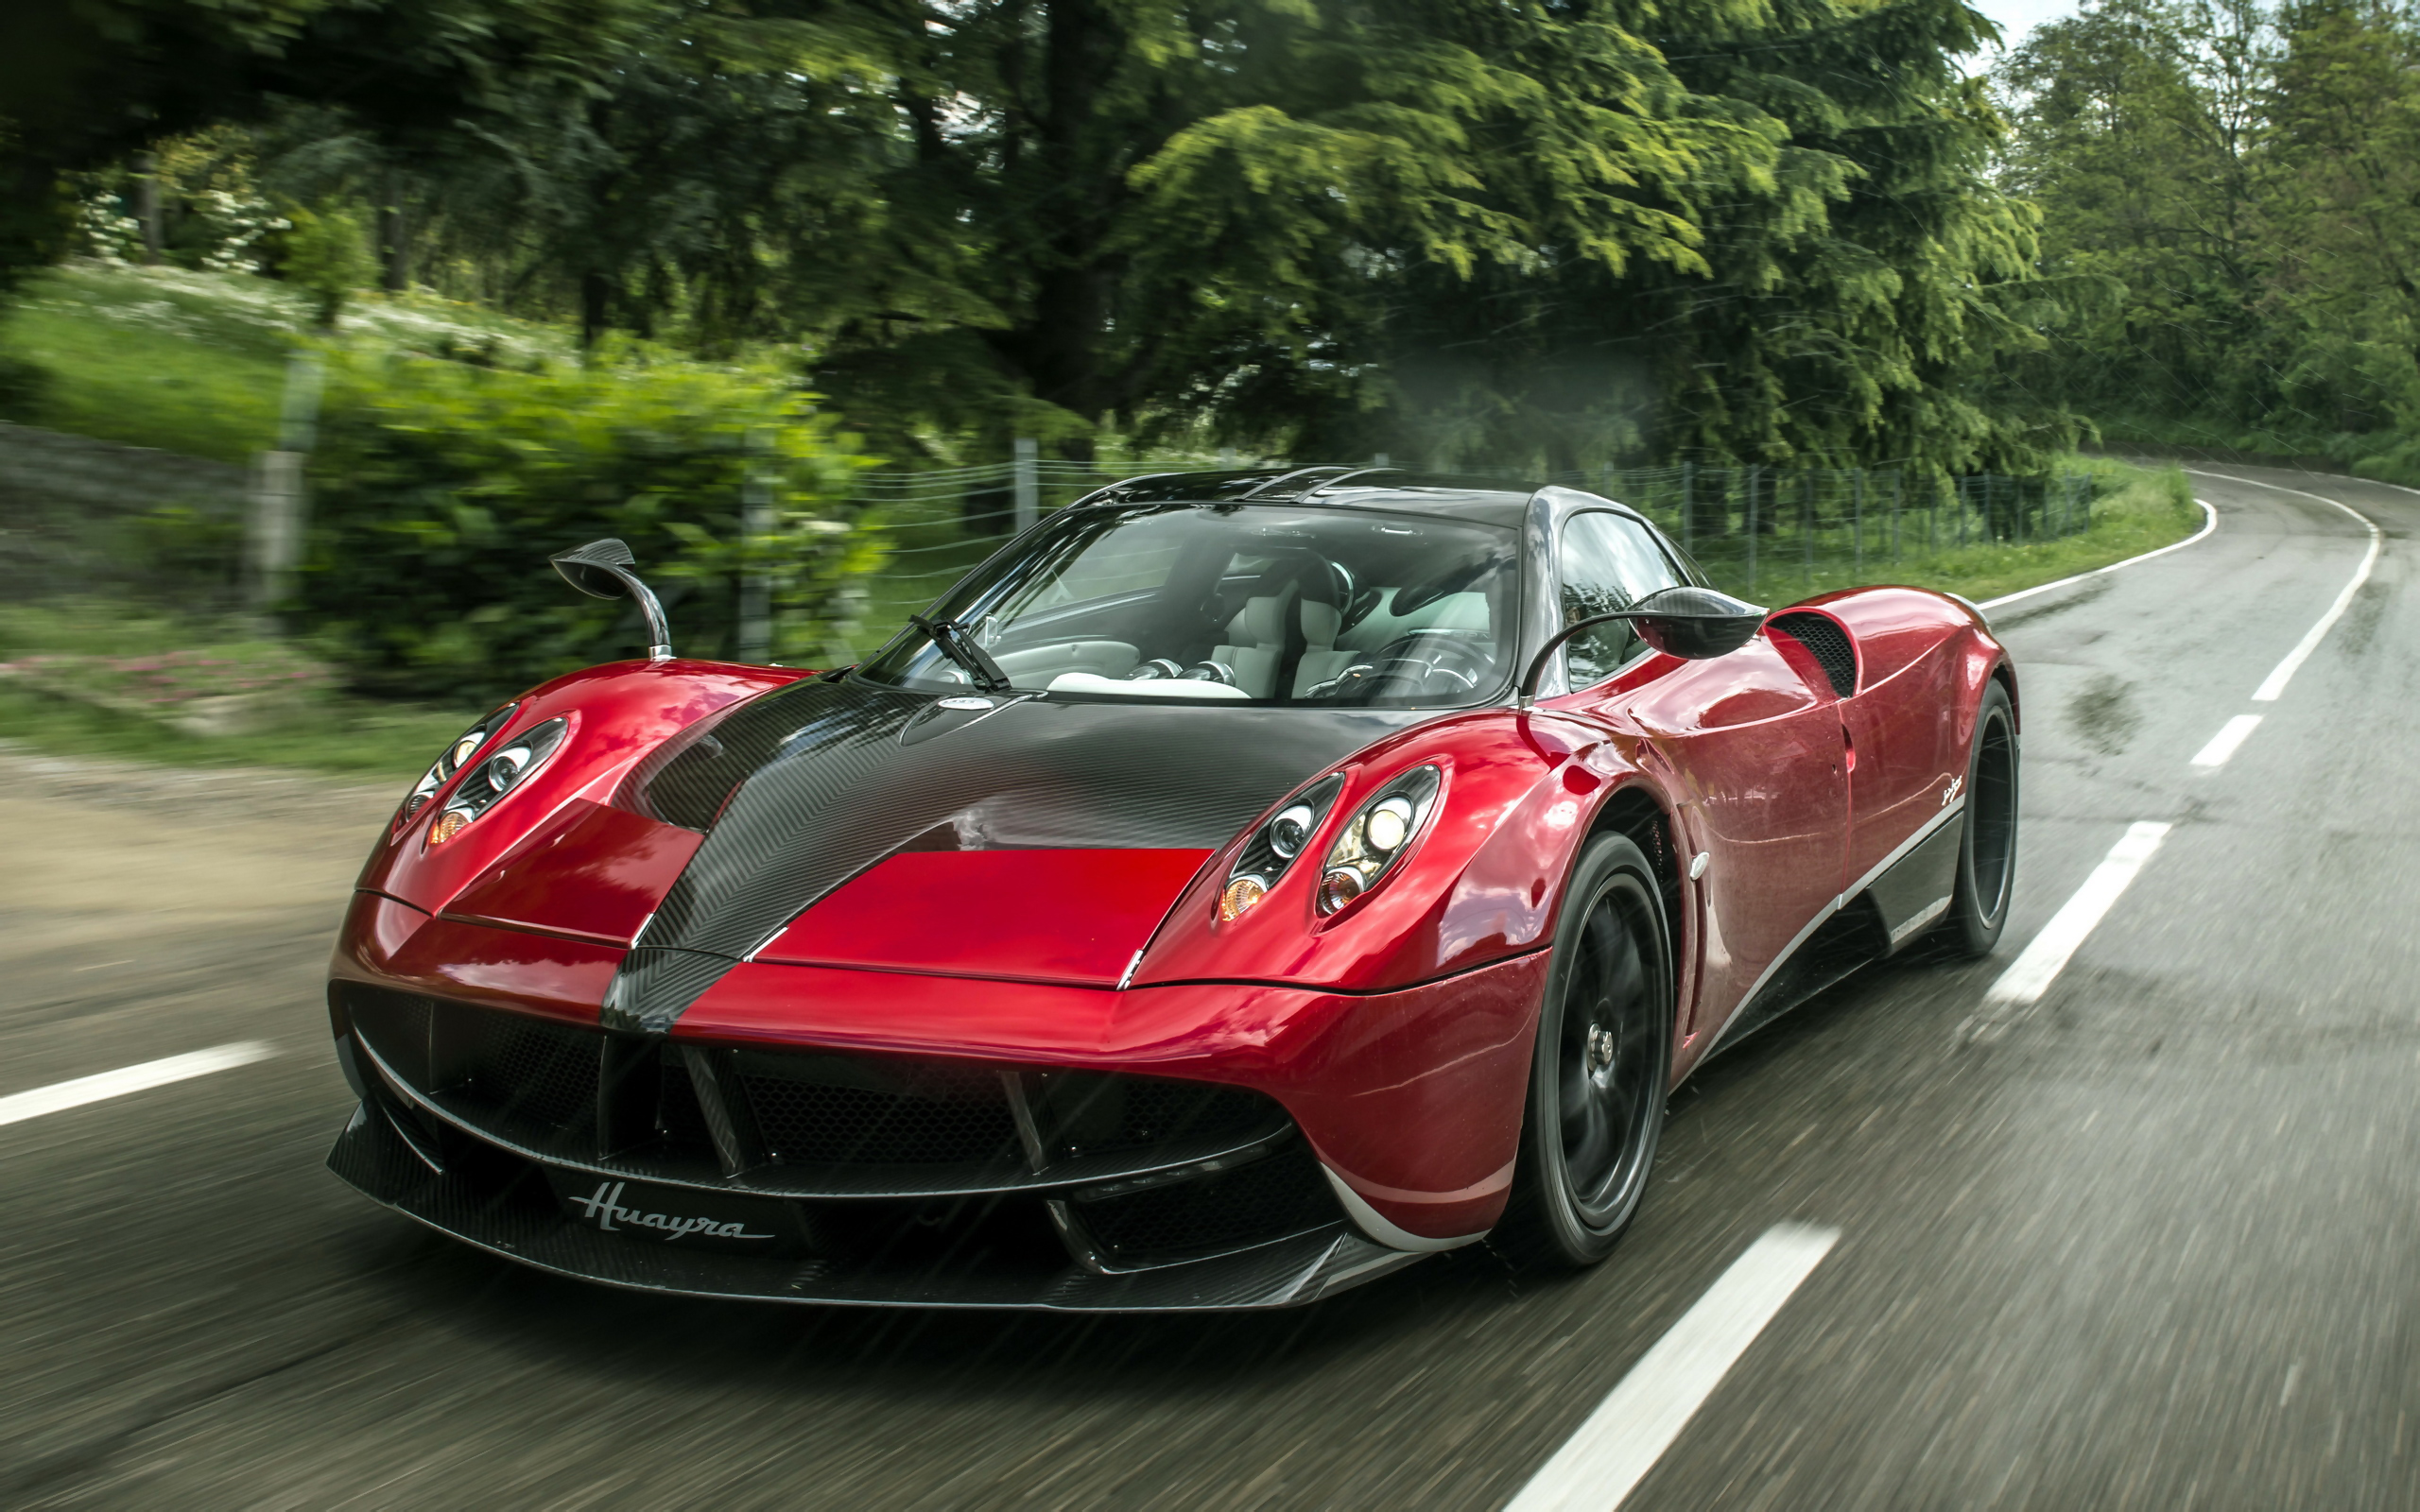 Red Pagani Huayra Wallpaper Gallery Yopriceville High Quality